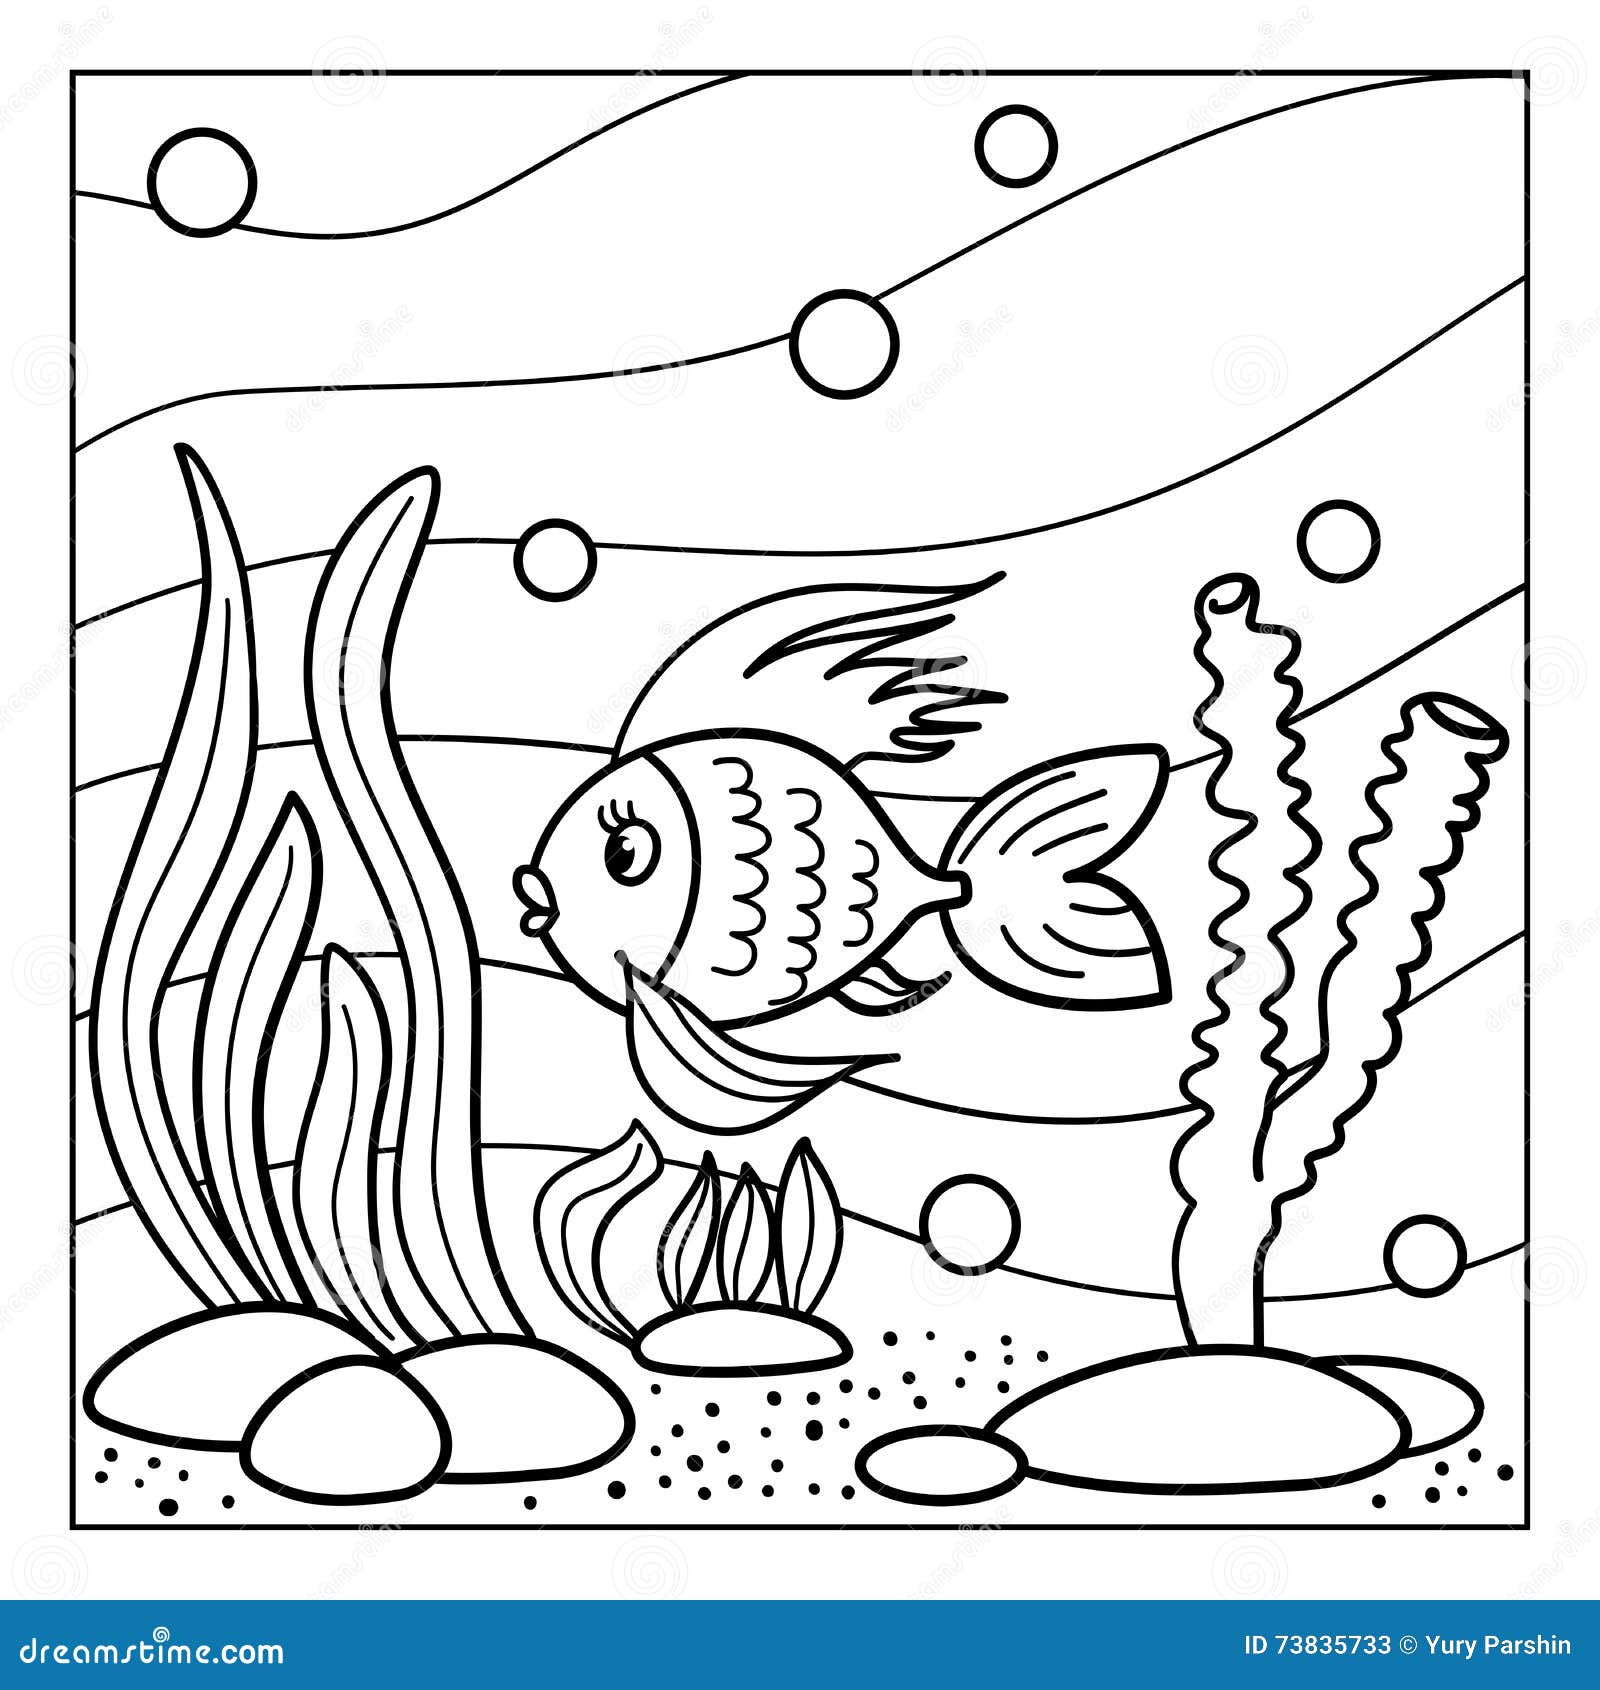 Underwater Fish Coloring Pages  www.imgkid.com  The Image Kid Has It!